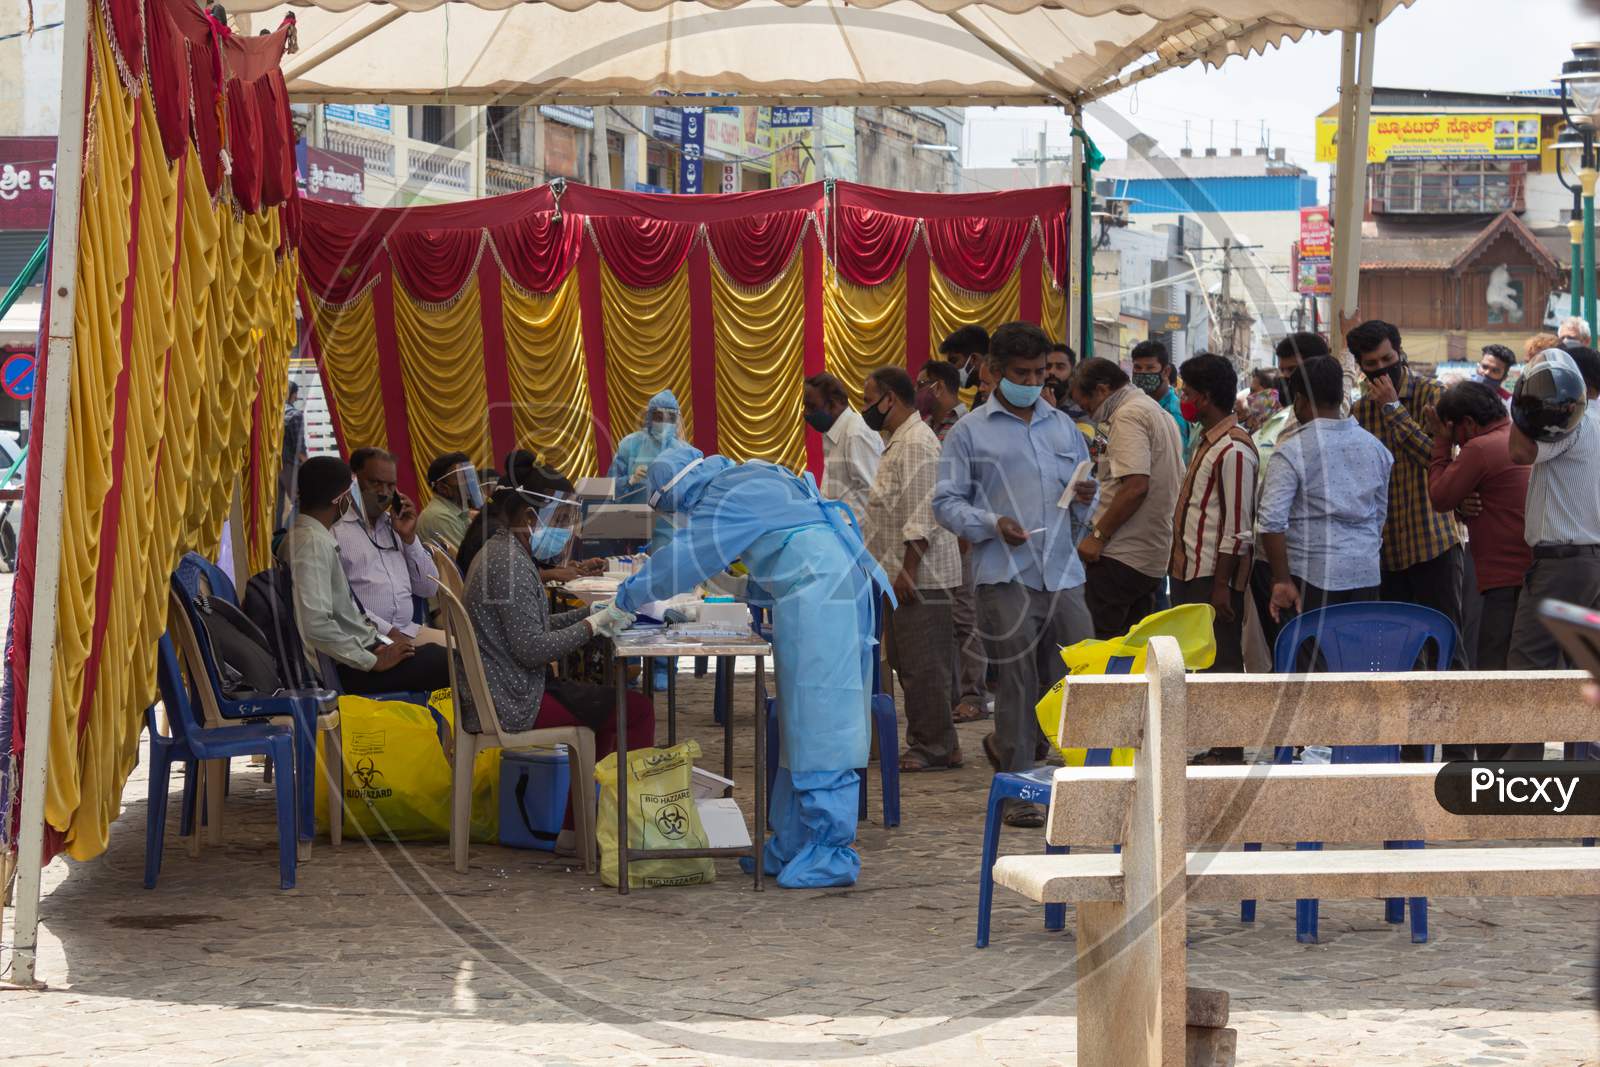 General Public are seen standing in a queue during Midday to get the Covid 19 test done  at a testing tent in Mysuru,Karnataka/India.